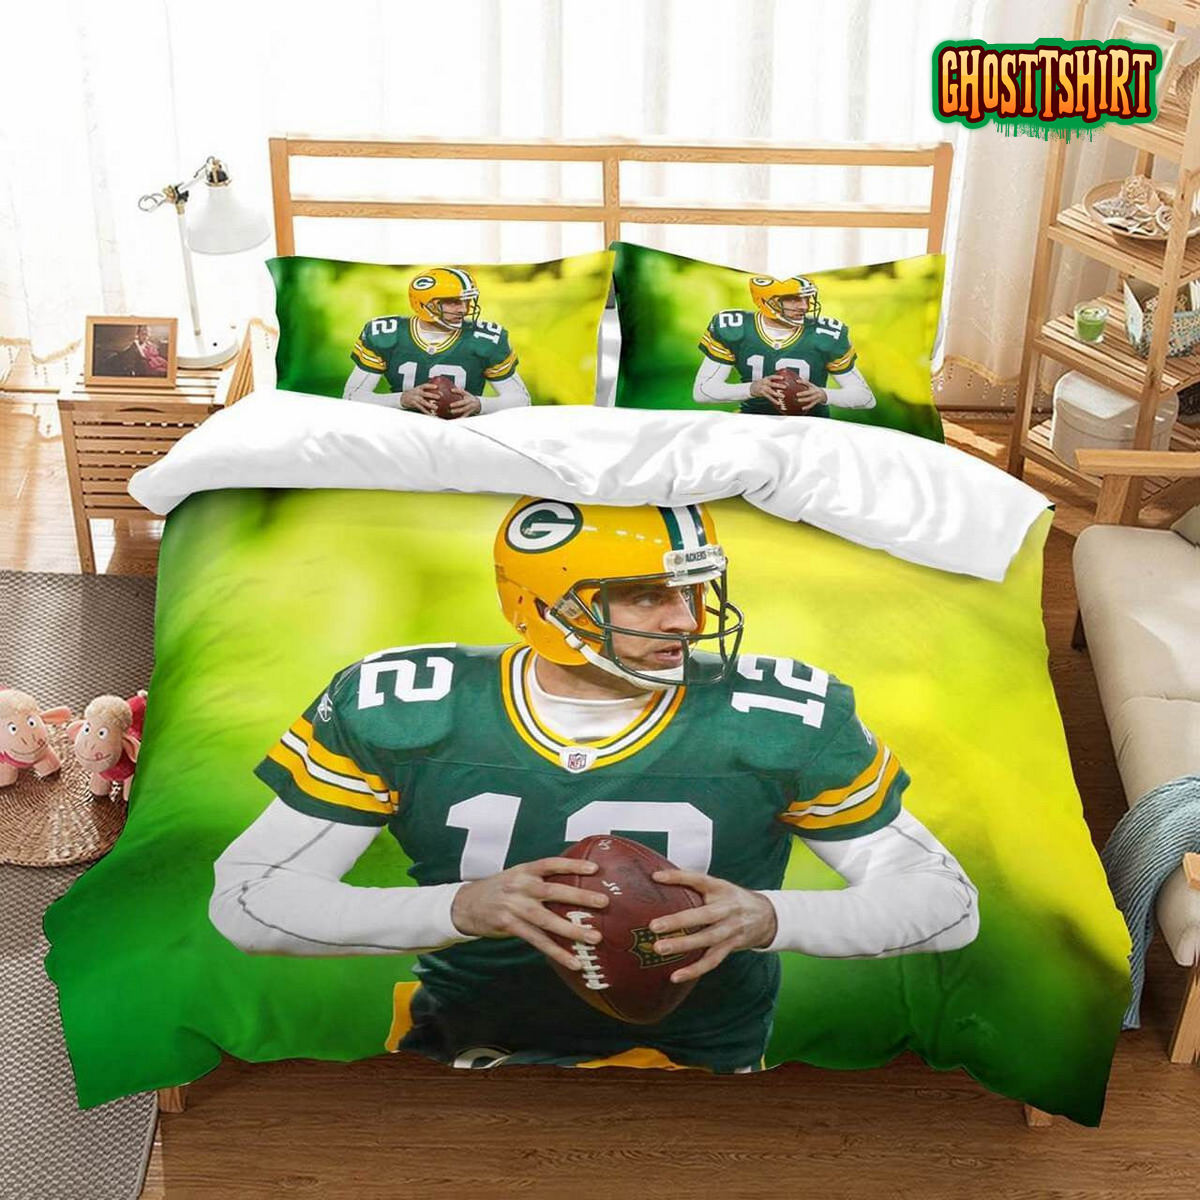 Aaron Rodgers Green Bay Packers Bedding Set